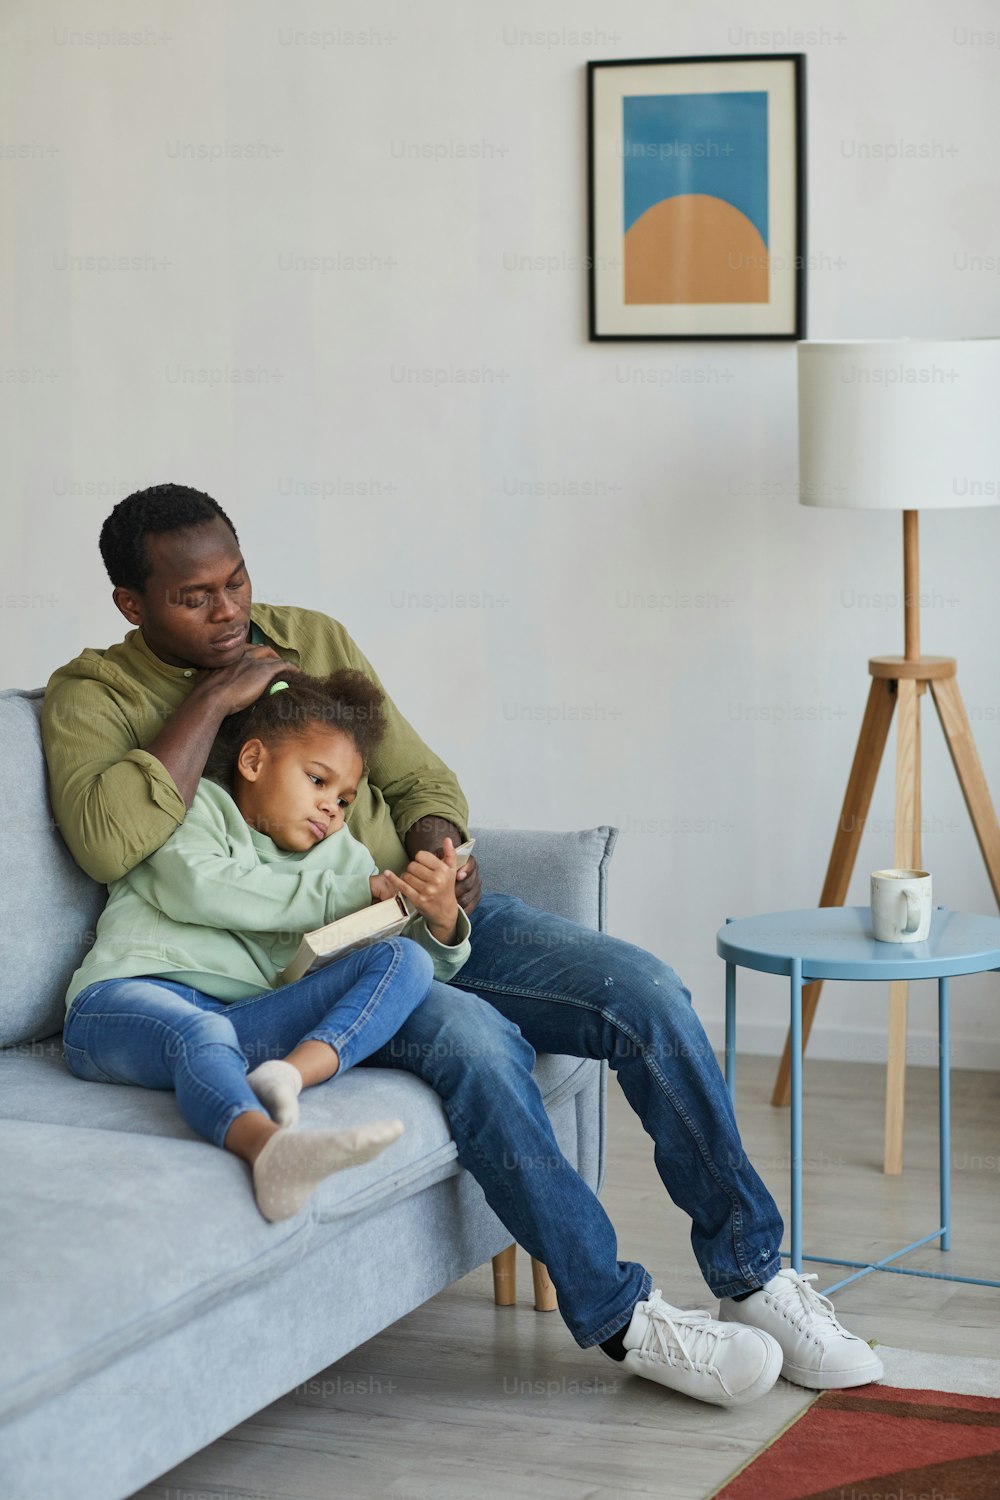 Full length portrait of loving African-American father and daughter reading while sitting on couch together in cozy home interior